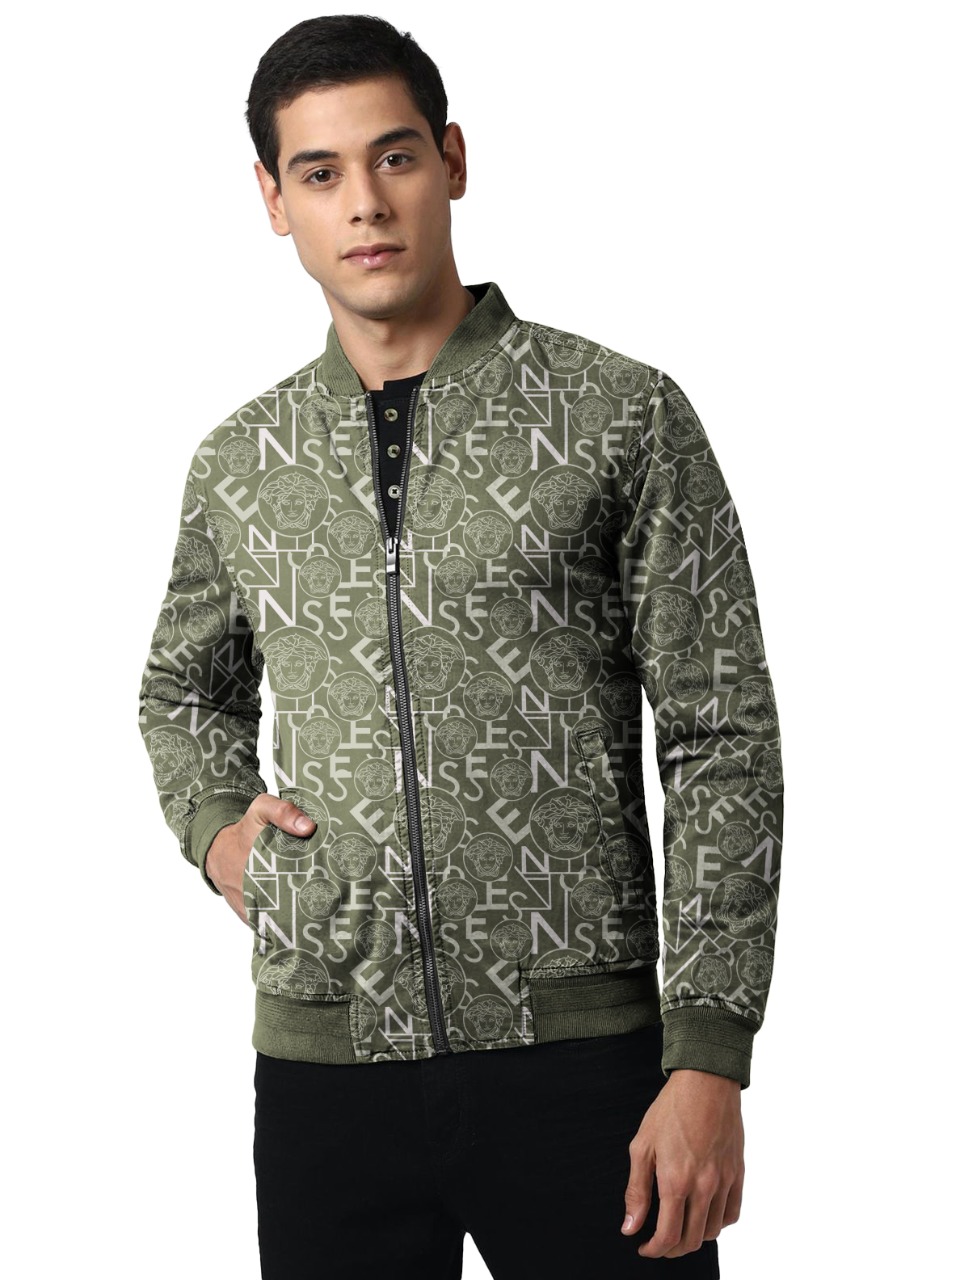 Swara Fancy Glamorous Men Printed Jackets Collection collection 5